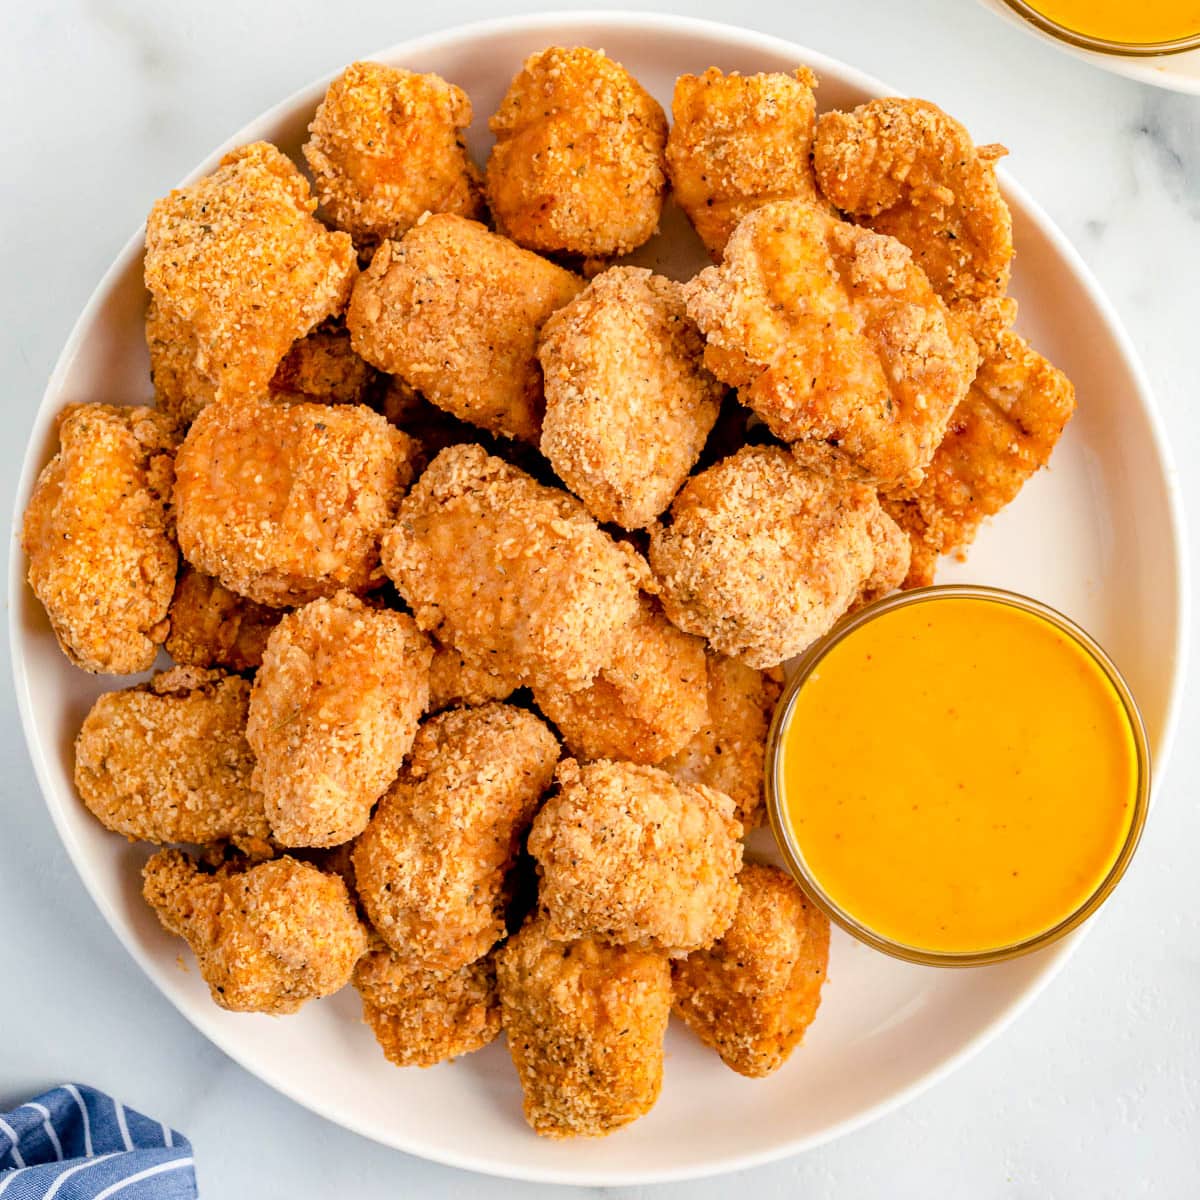 chicken nuggets piled high on a plate with dipping sauce.